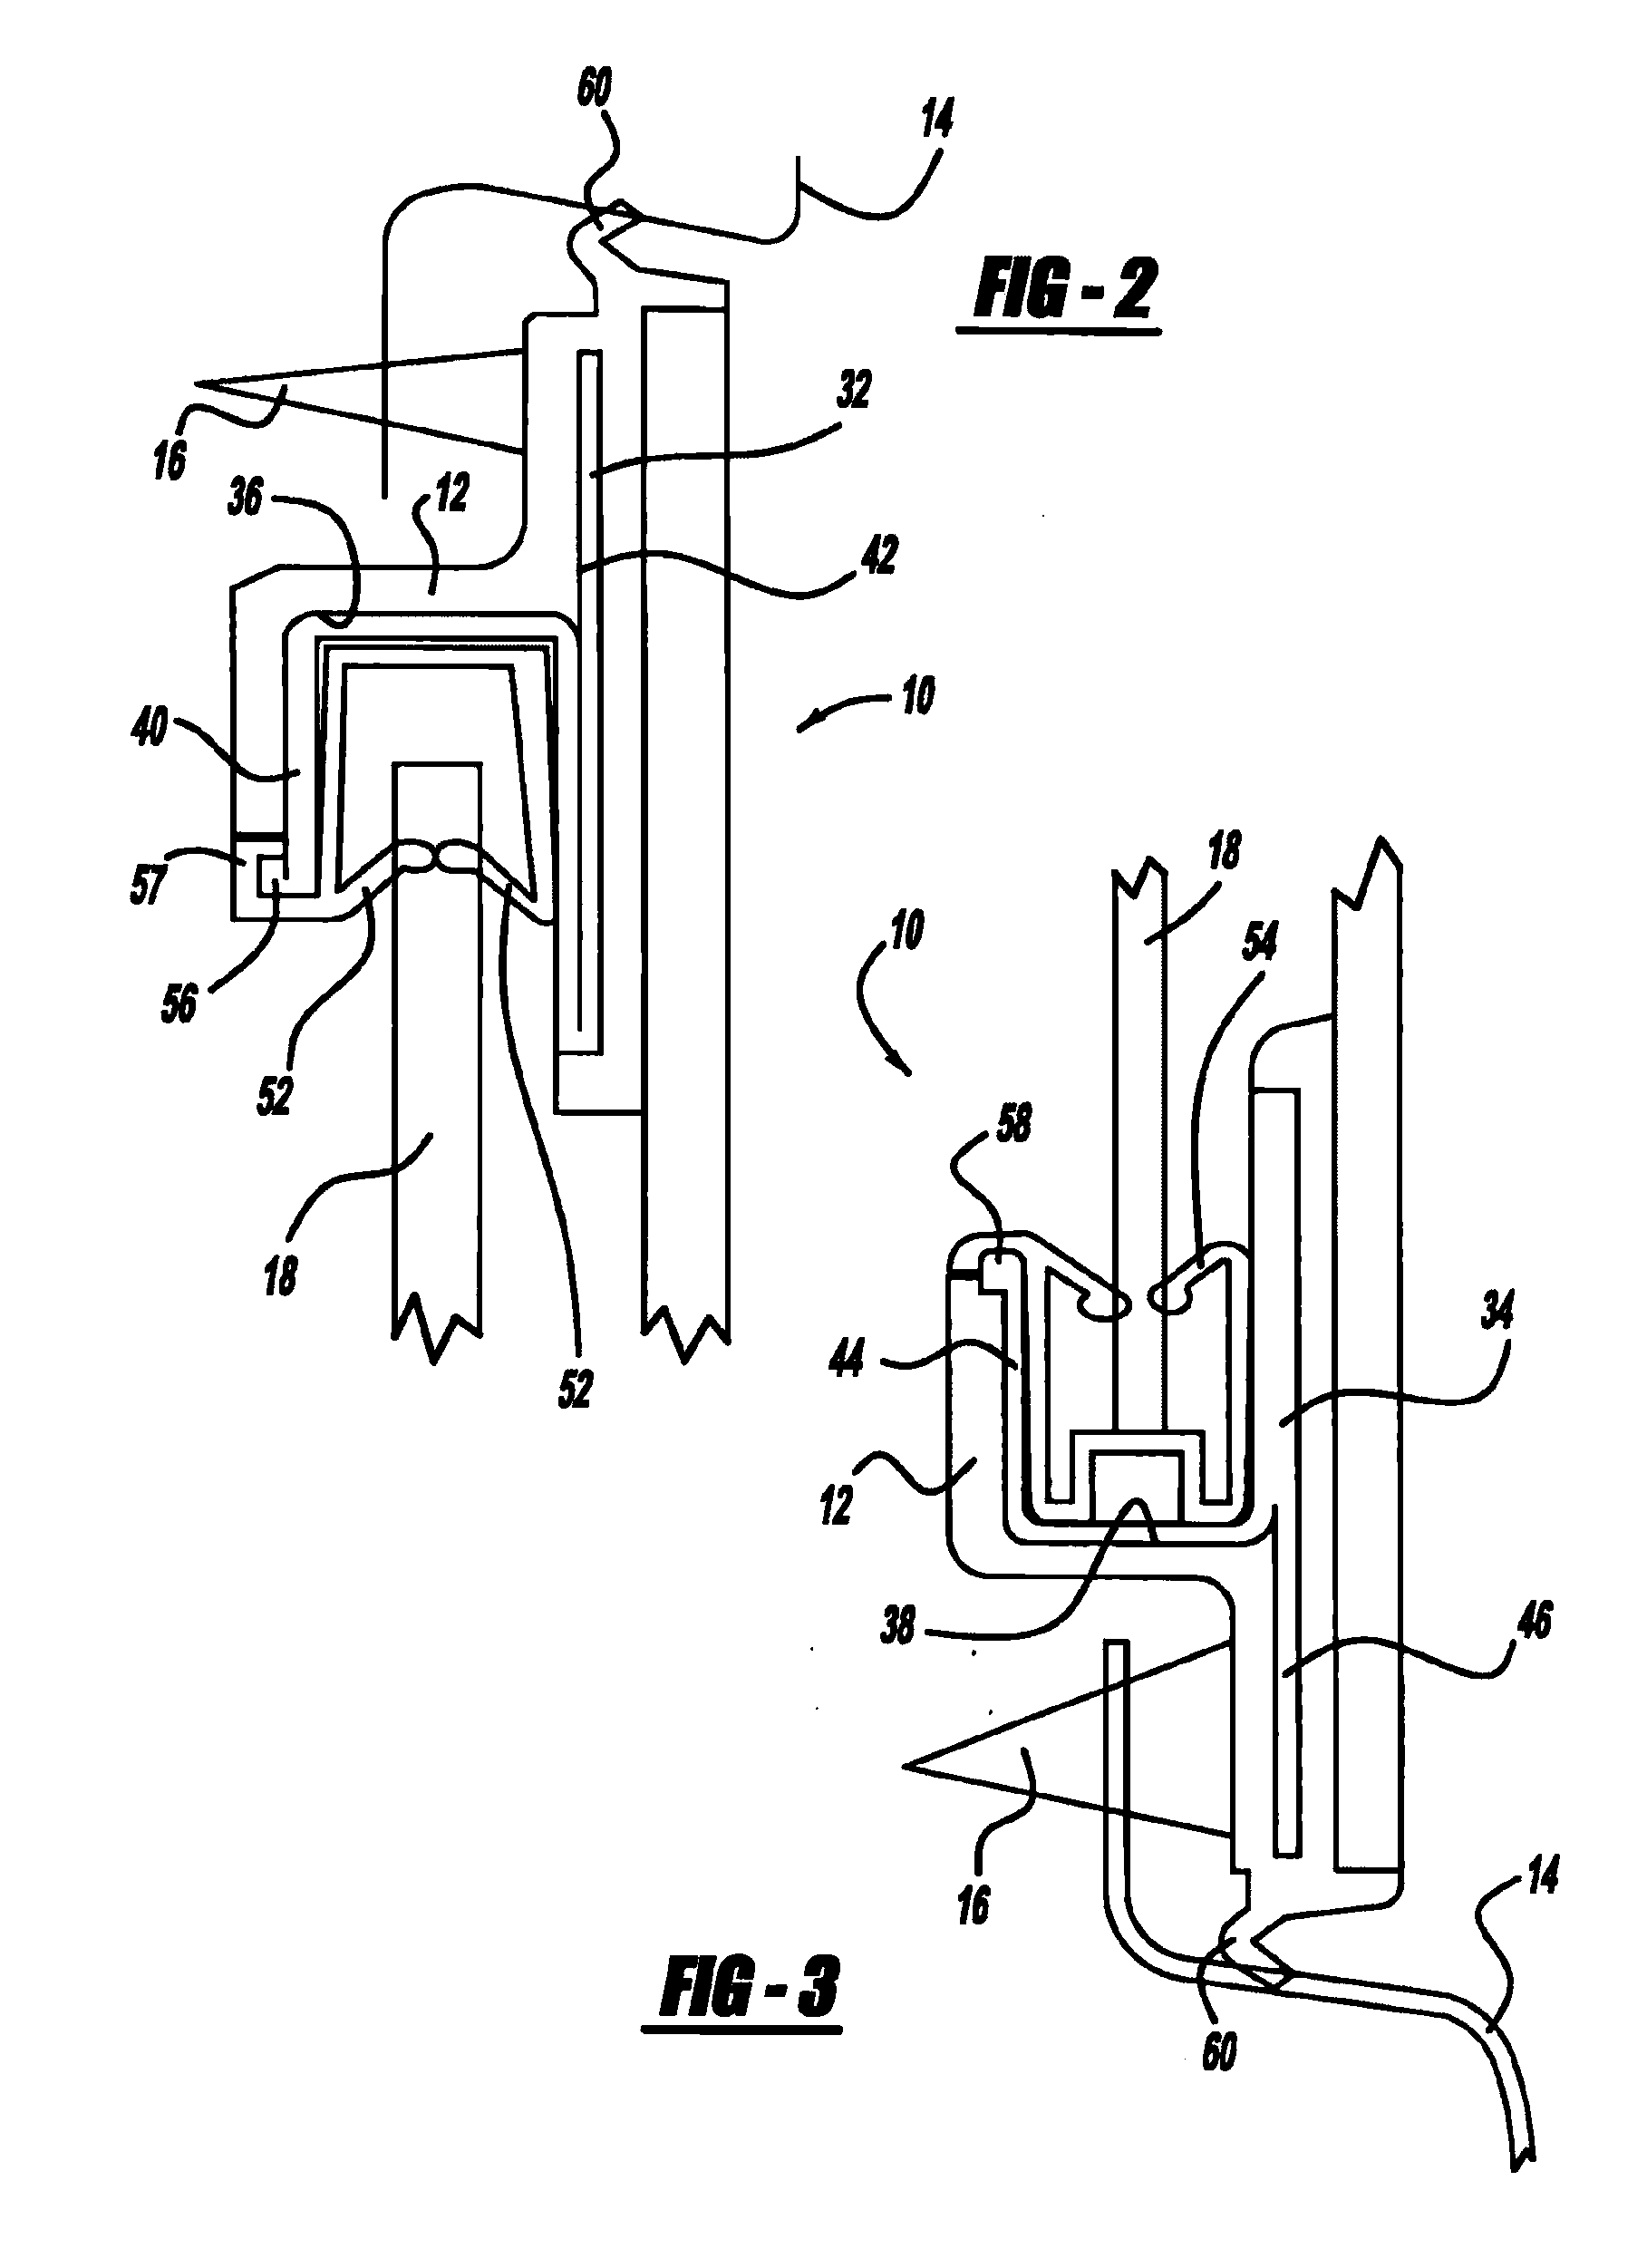 Multi-Pane Window Assembly with Two-Sided Frame and Sliding Pane